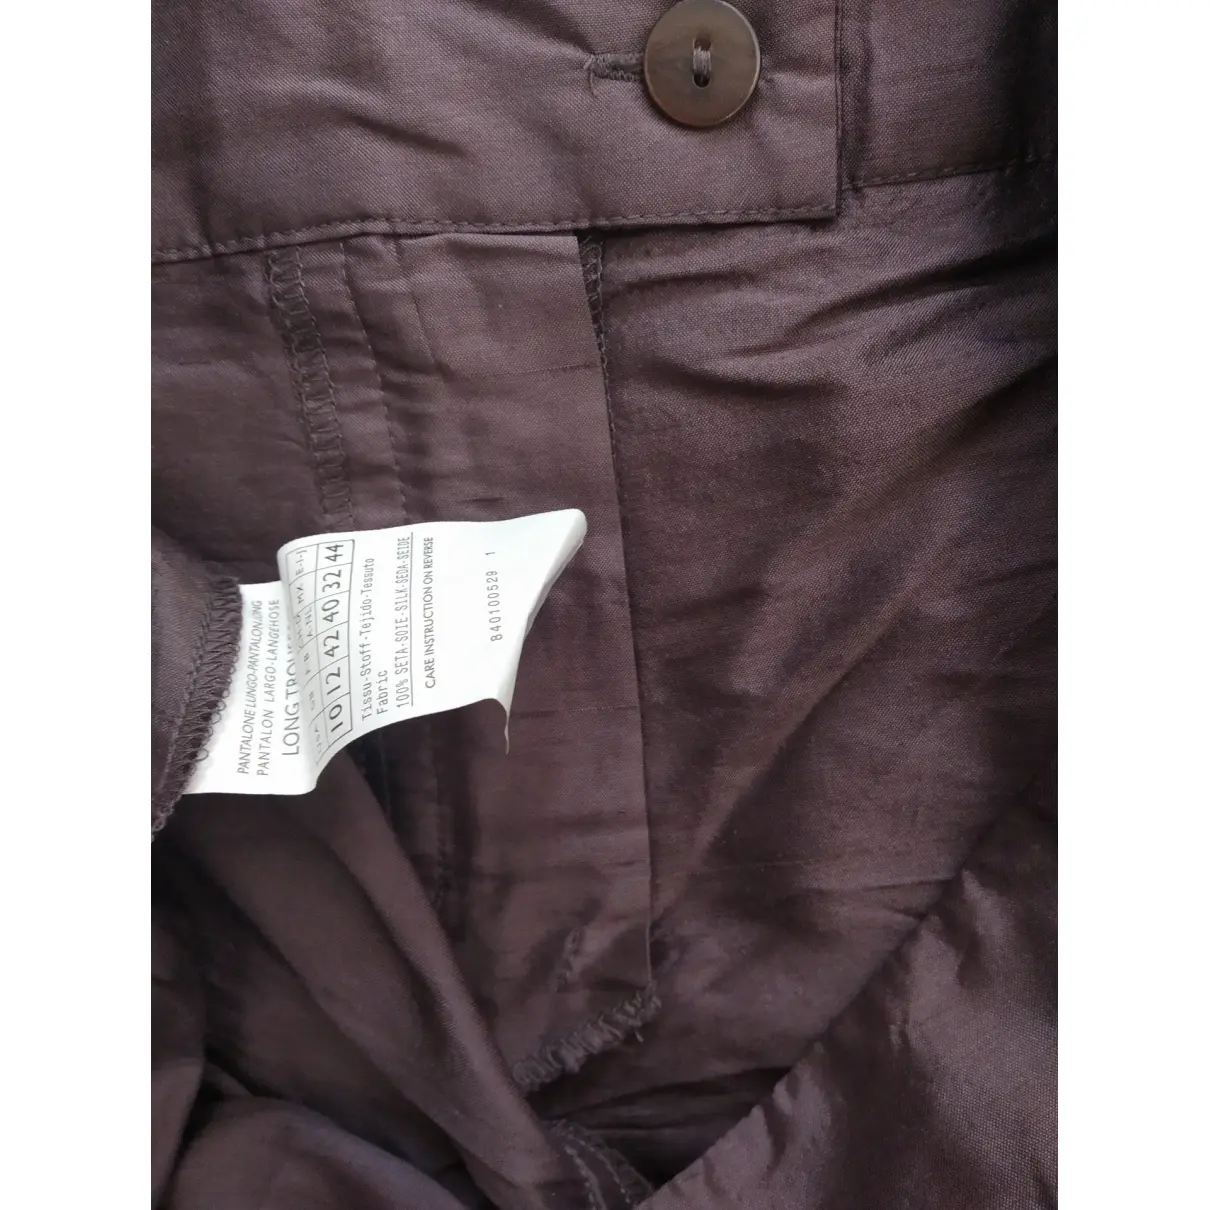 Buy Max & Co Silk straight pants online